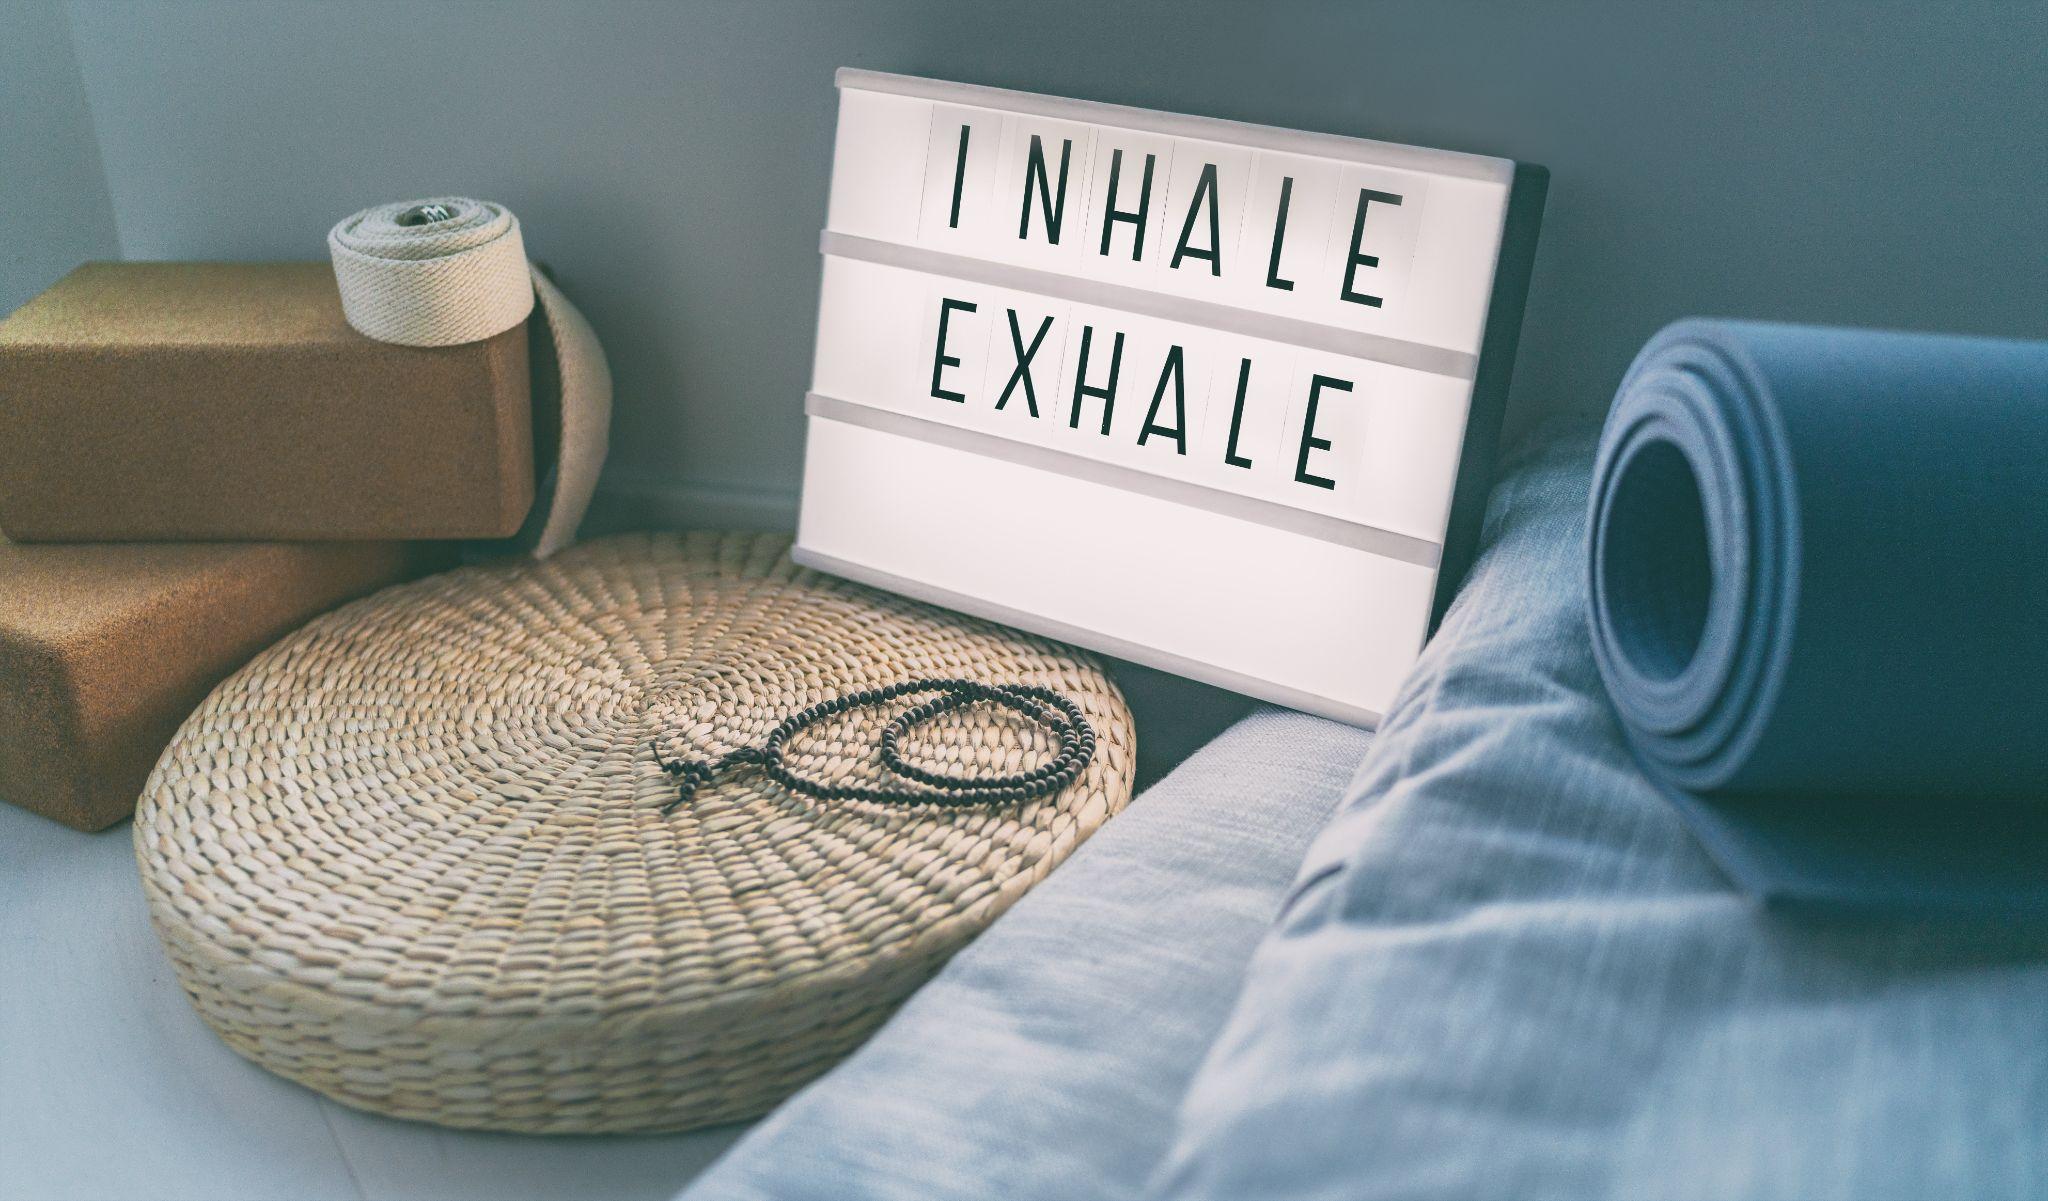 inhale exhale therapeutic sign